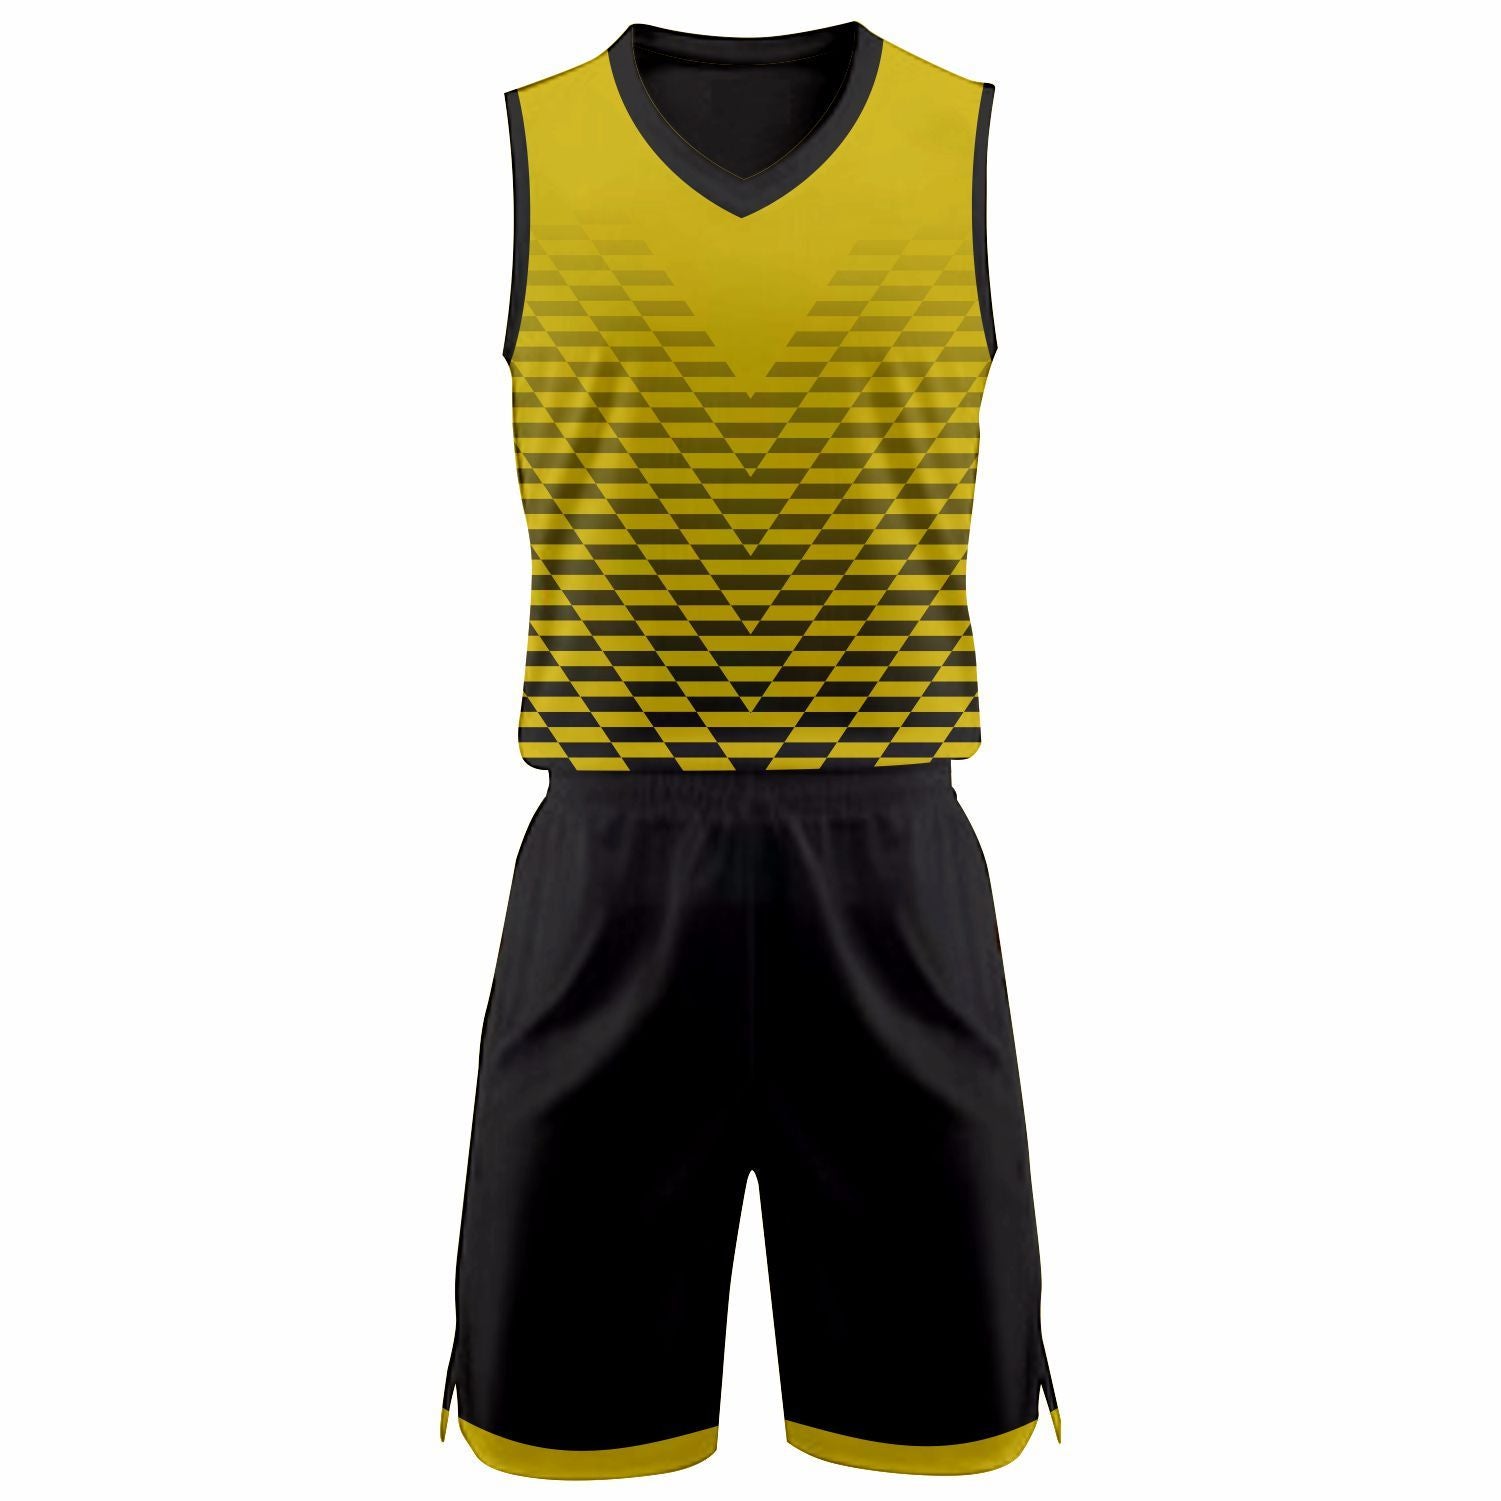 Full Black With Yellow Lining Basketball Jersey Full Sublimation